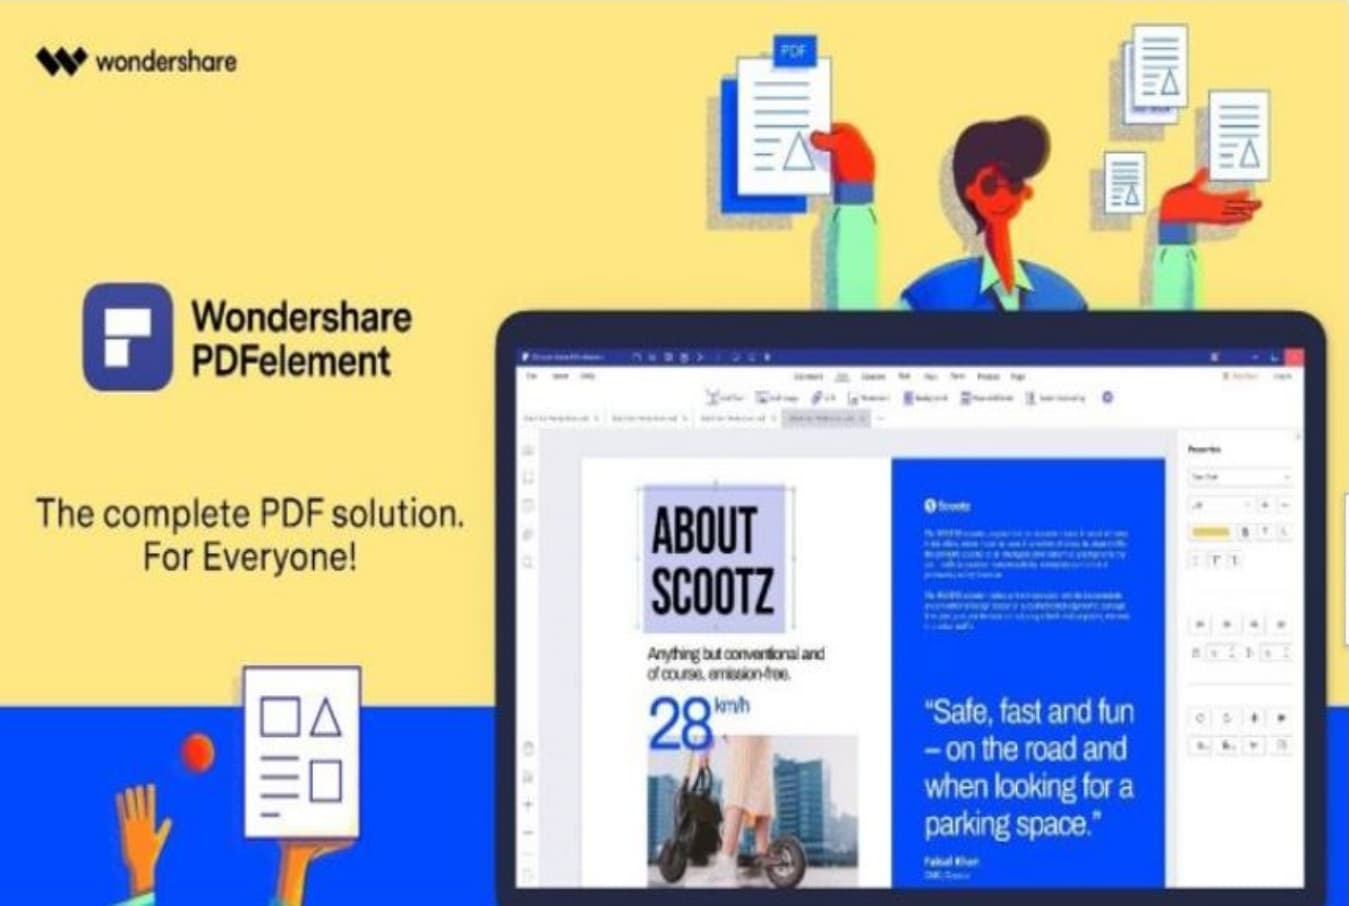 The new Wondershare PDF Element with added features